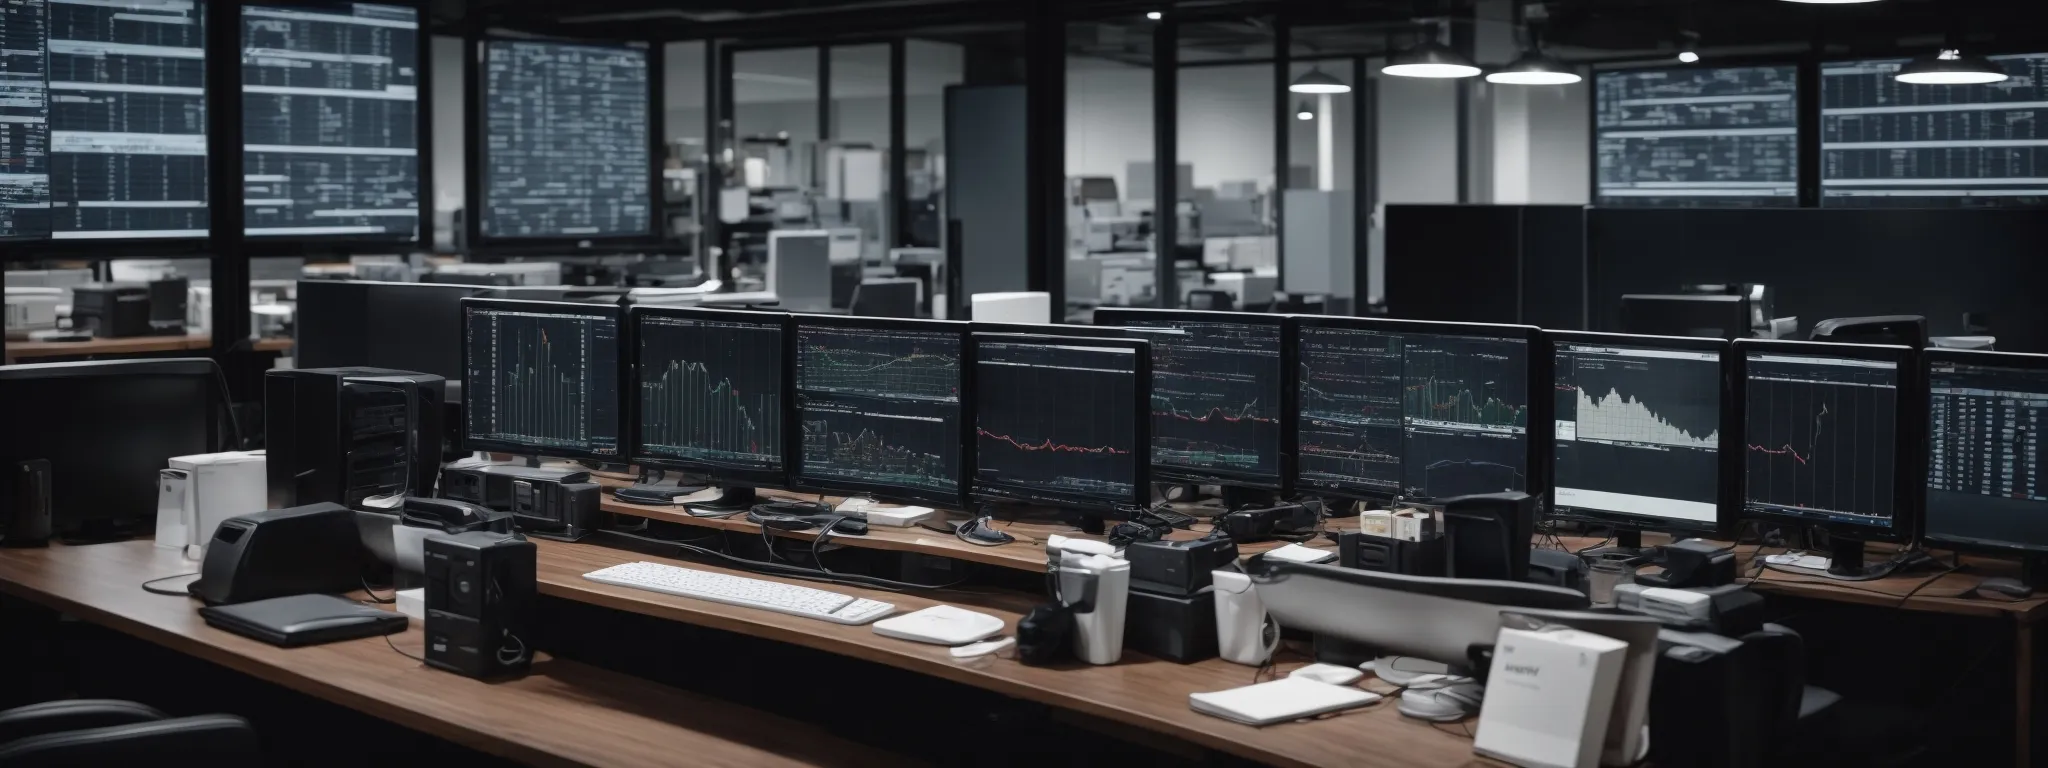 a neatly organized office space with multiple computer monitors displaying charts and analytical data.